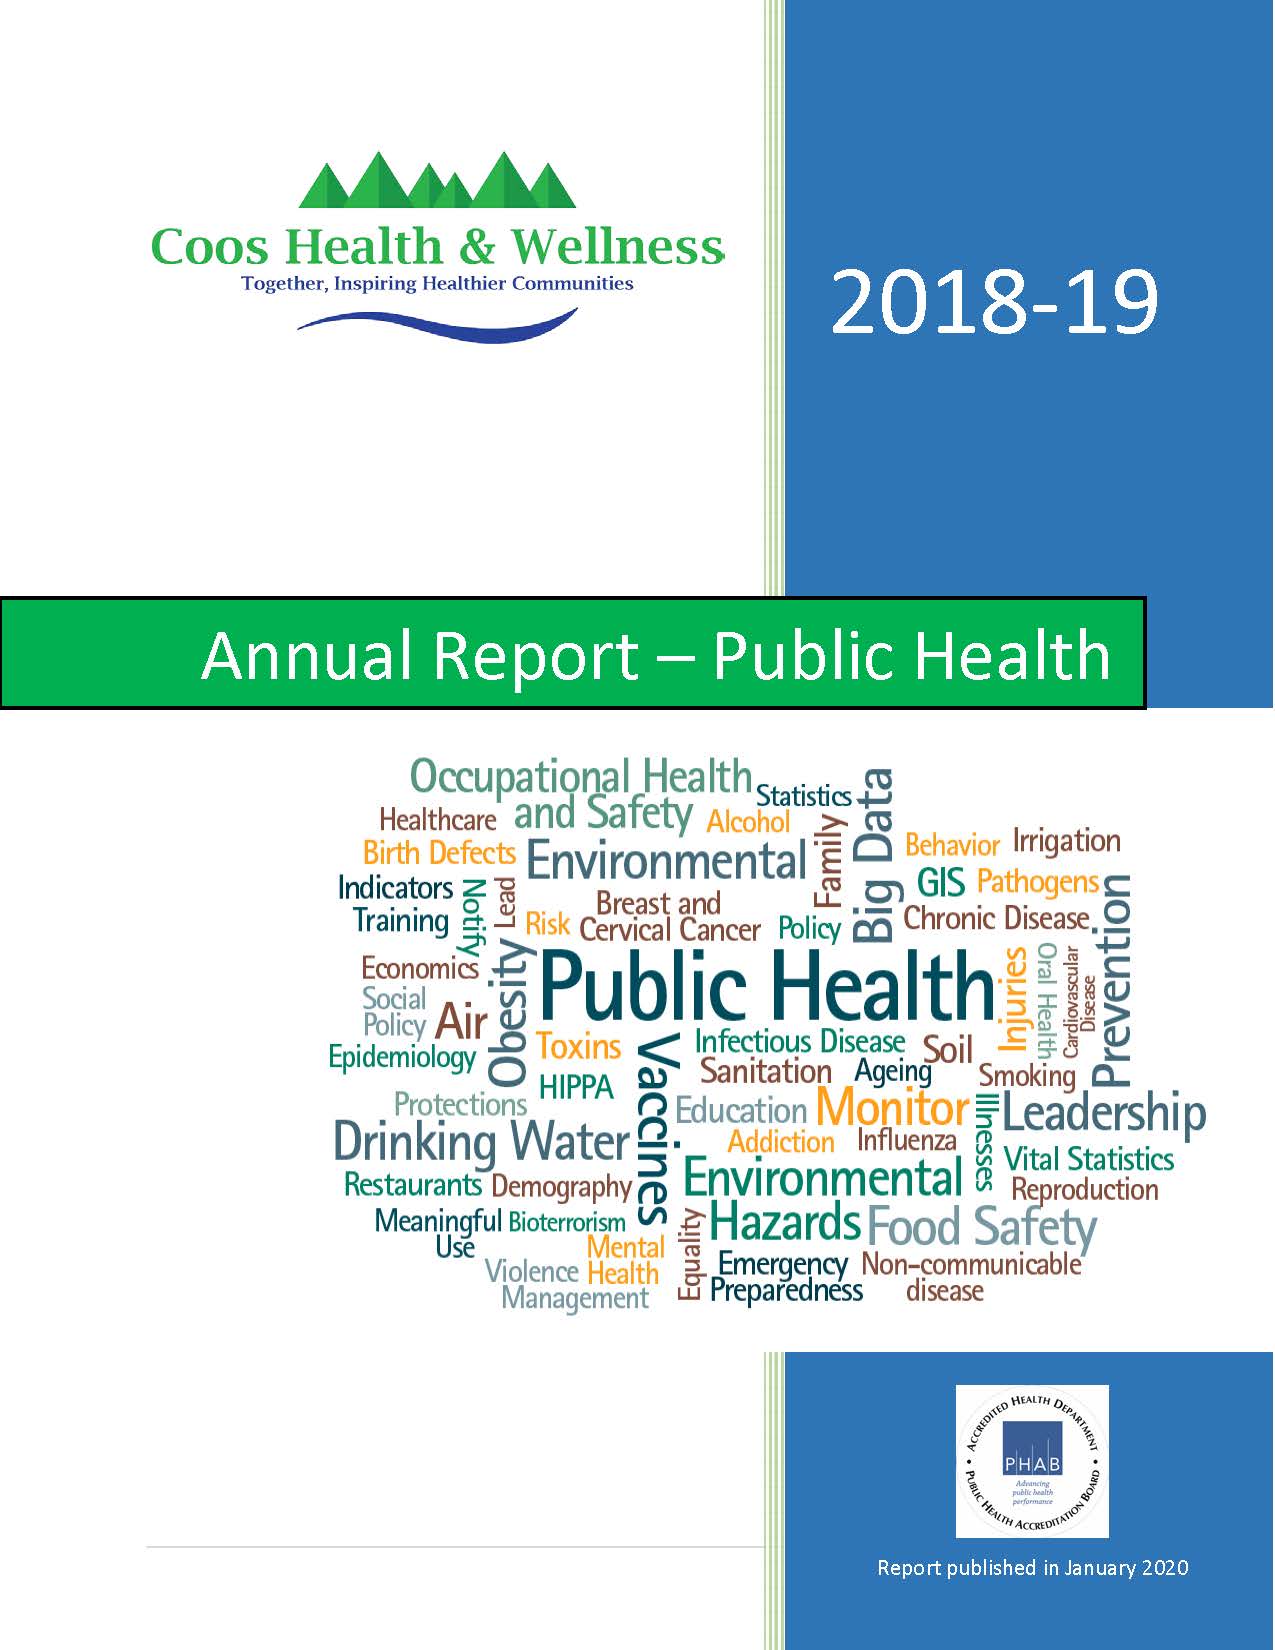 Annual Report 2018-2019 | Coos Health & Wellness